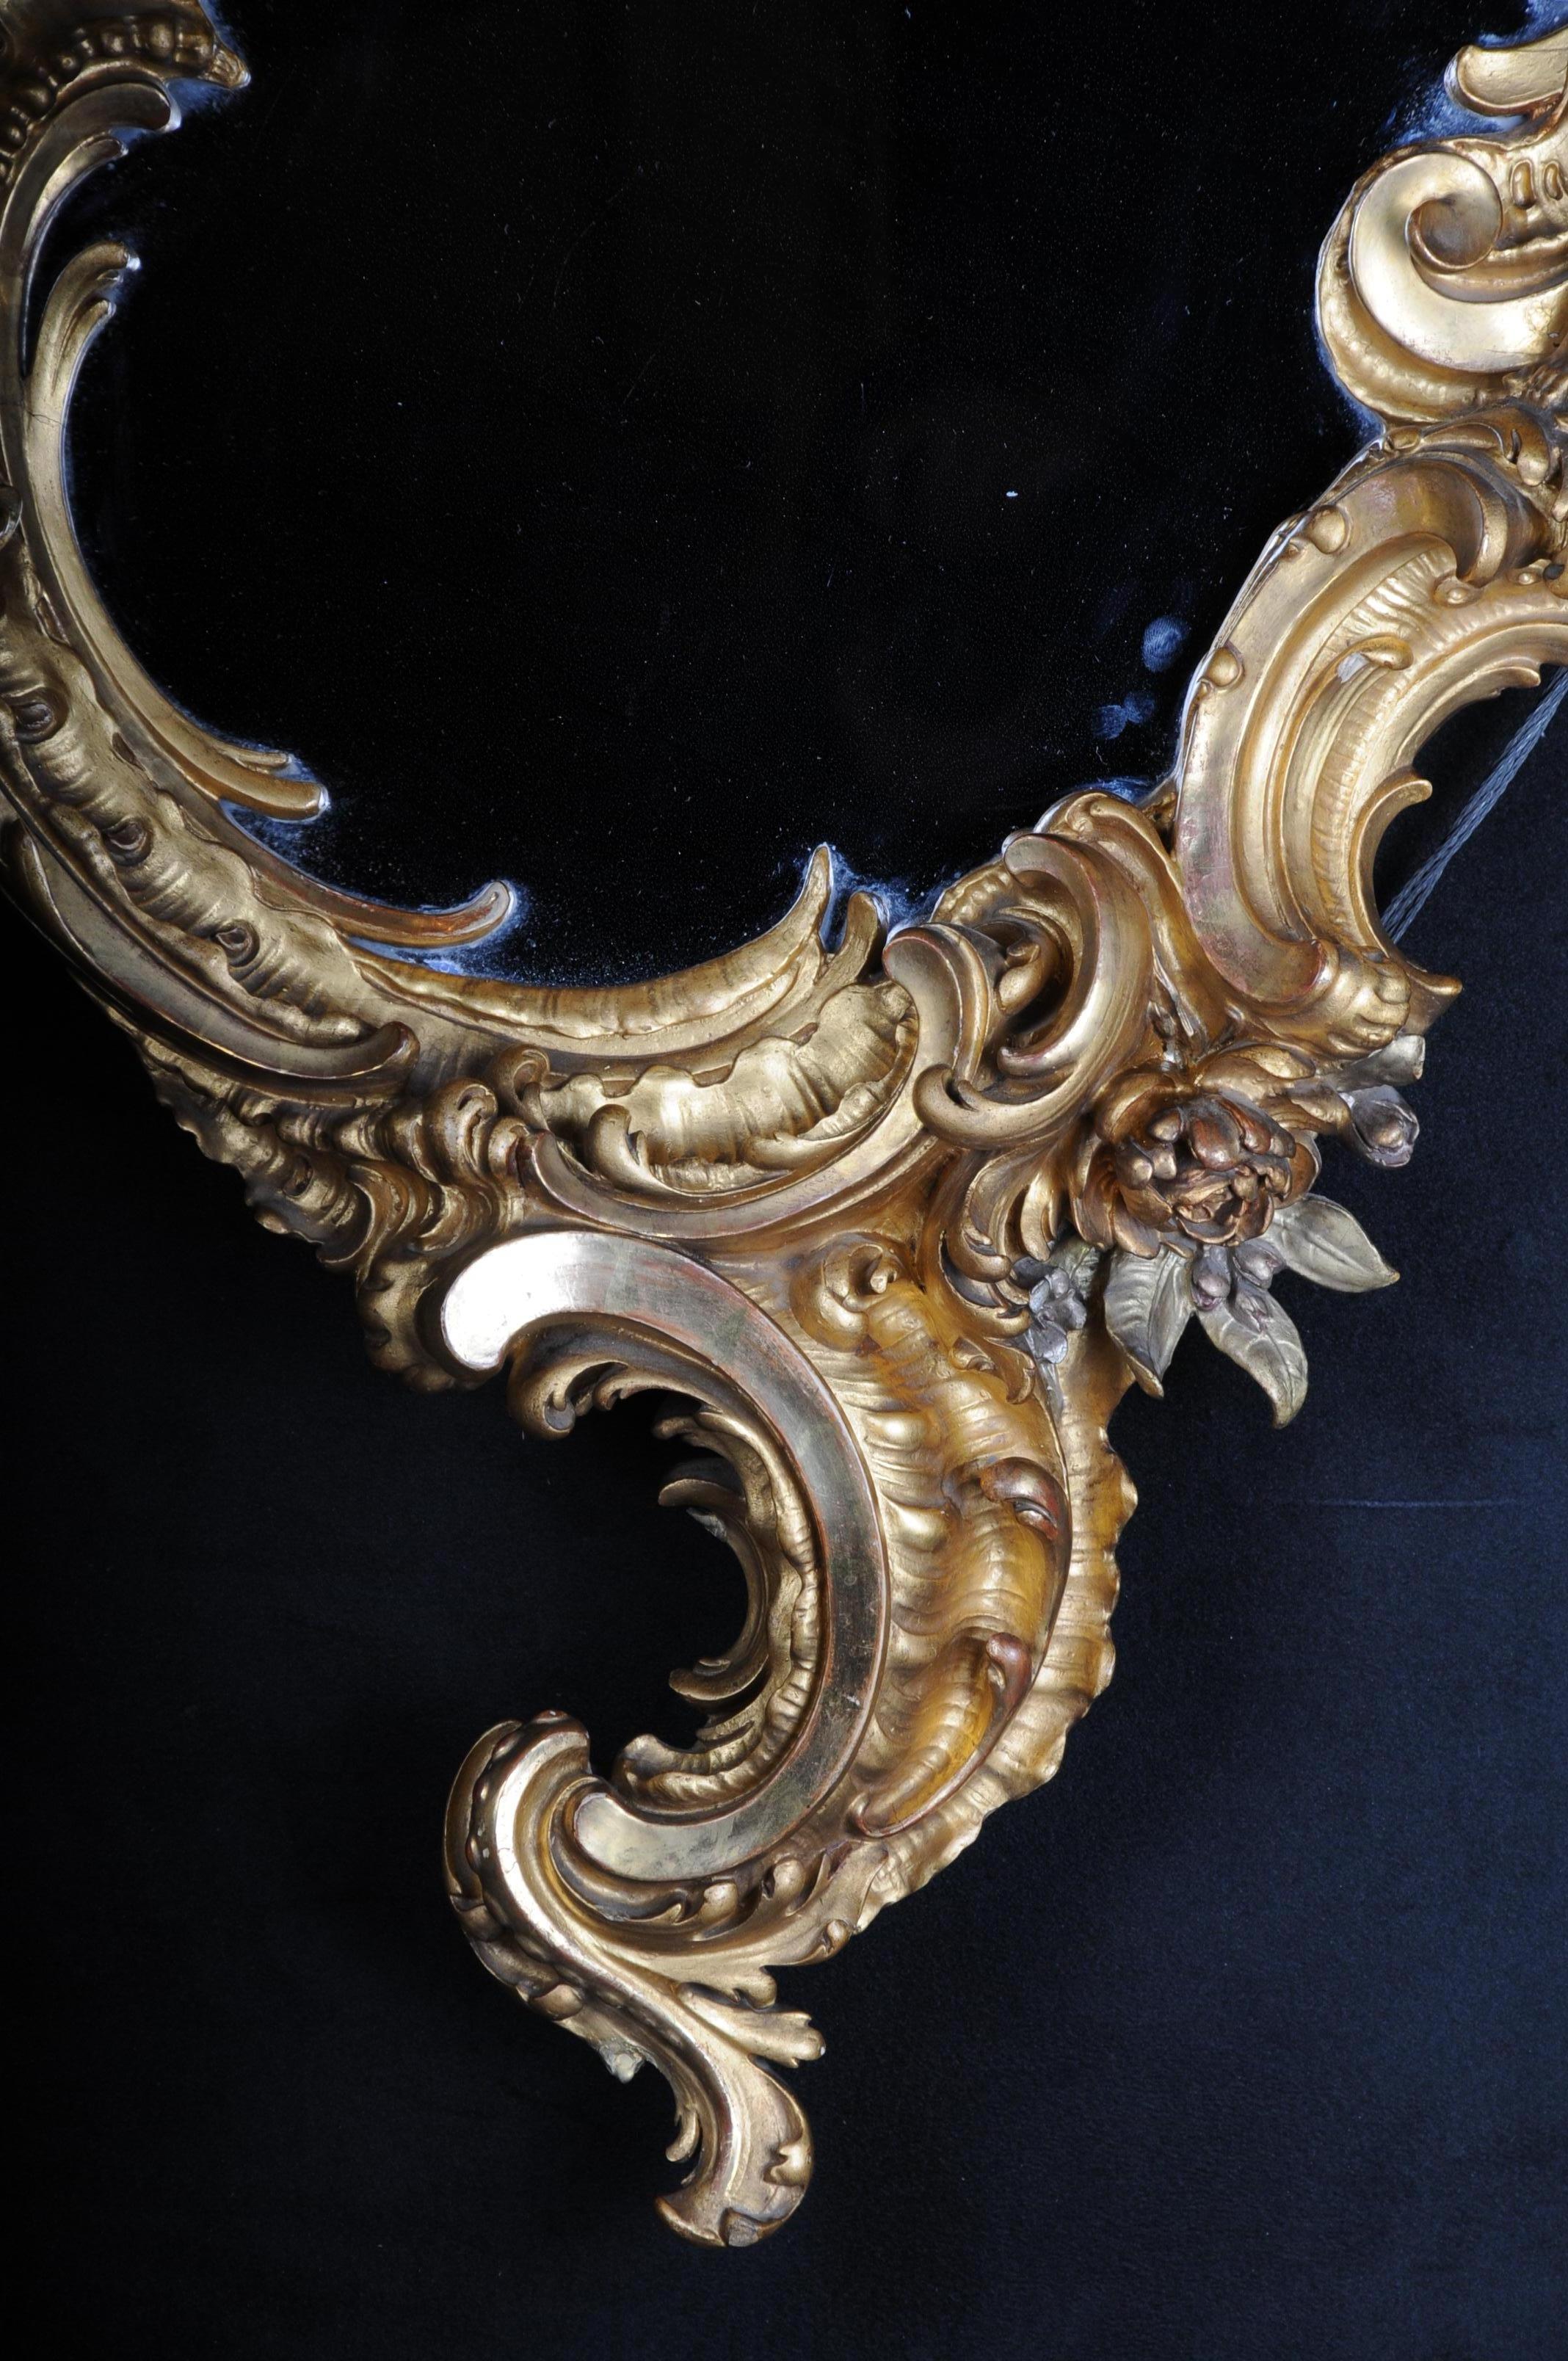 Ornate rococo mirror, solid wood gilded in 1870, Paris
Ornate and gold leaf mirror, Paris, circa 1870
Rocaille body framed with rich rococo carving. Rocaille-shaped mirror frame with flowers and Puttos.
Old mirror glass. Extremely high quality